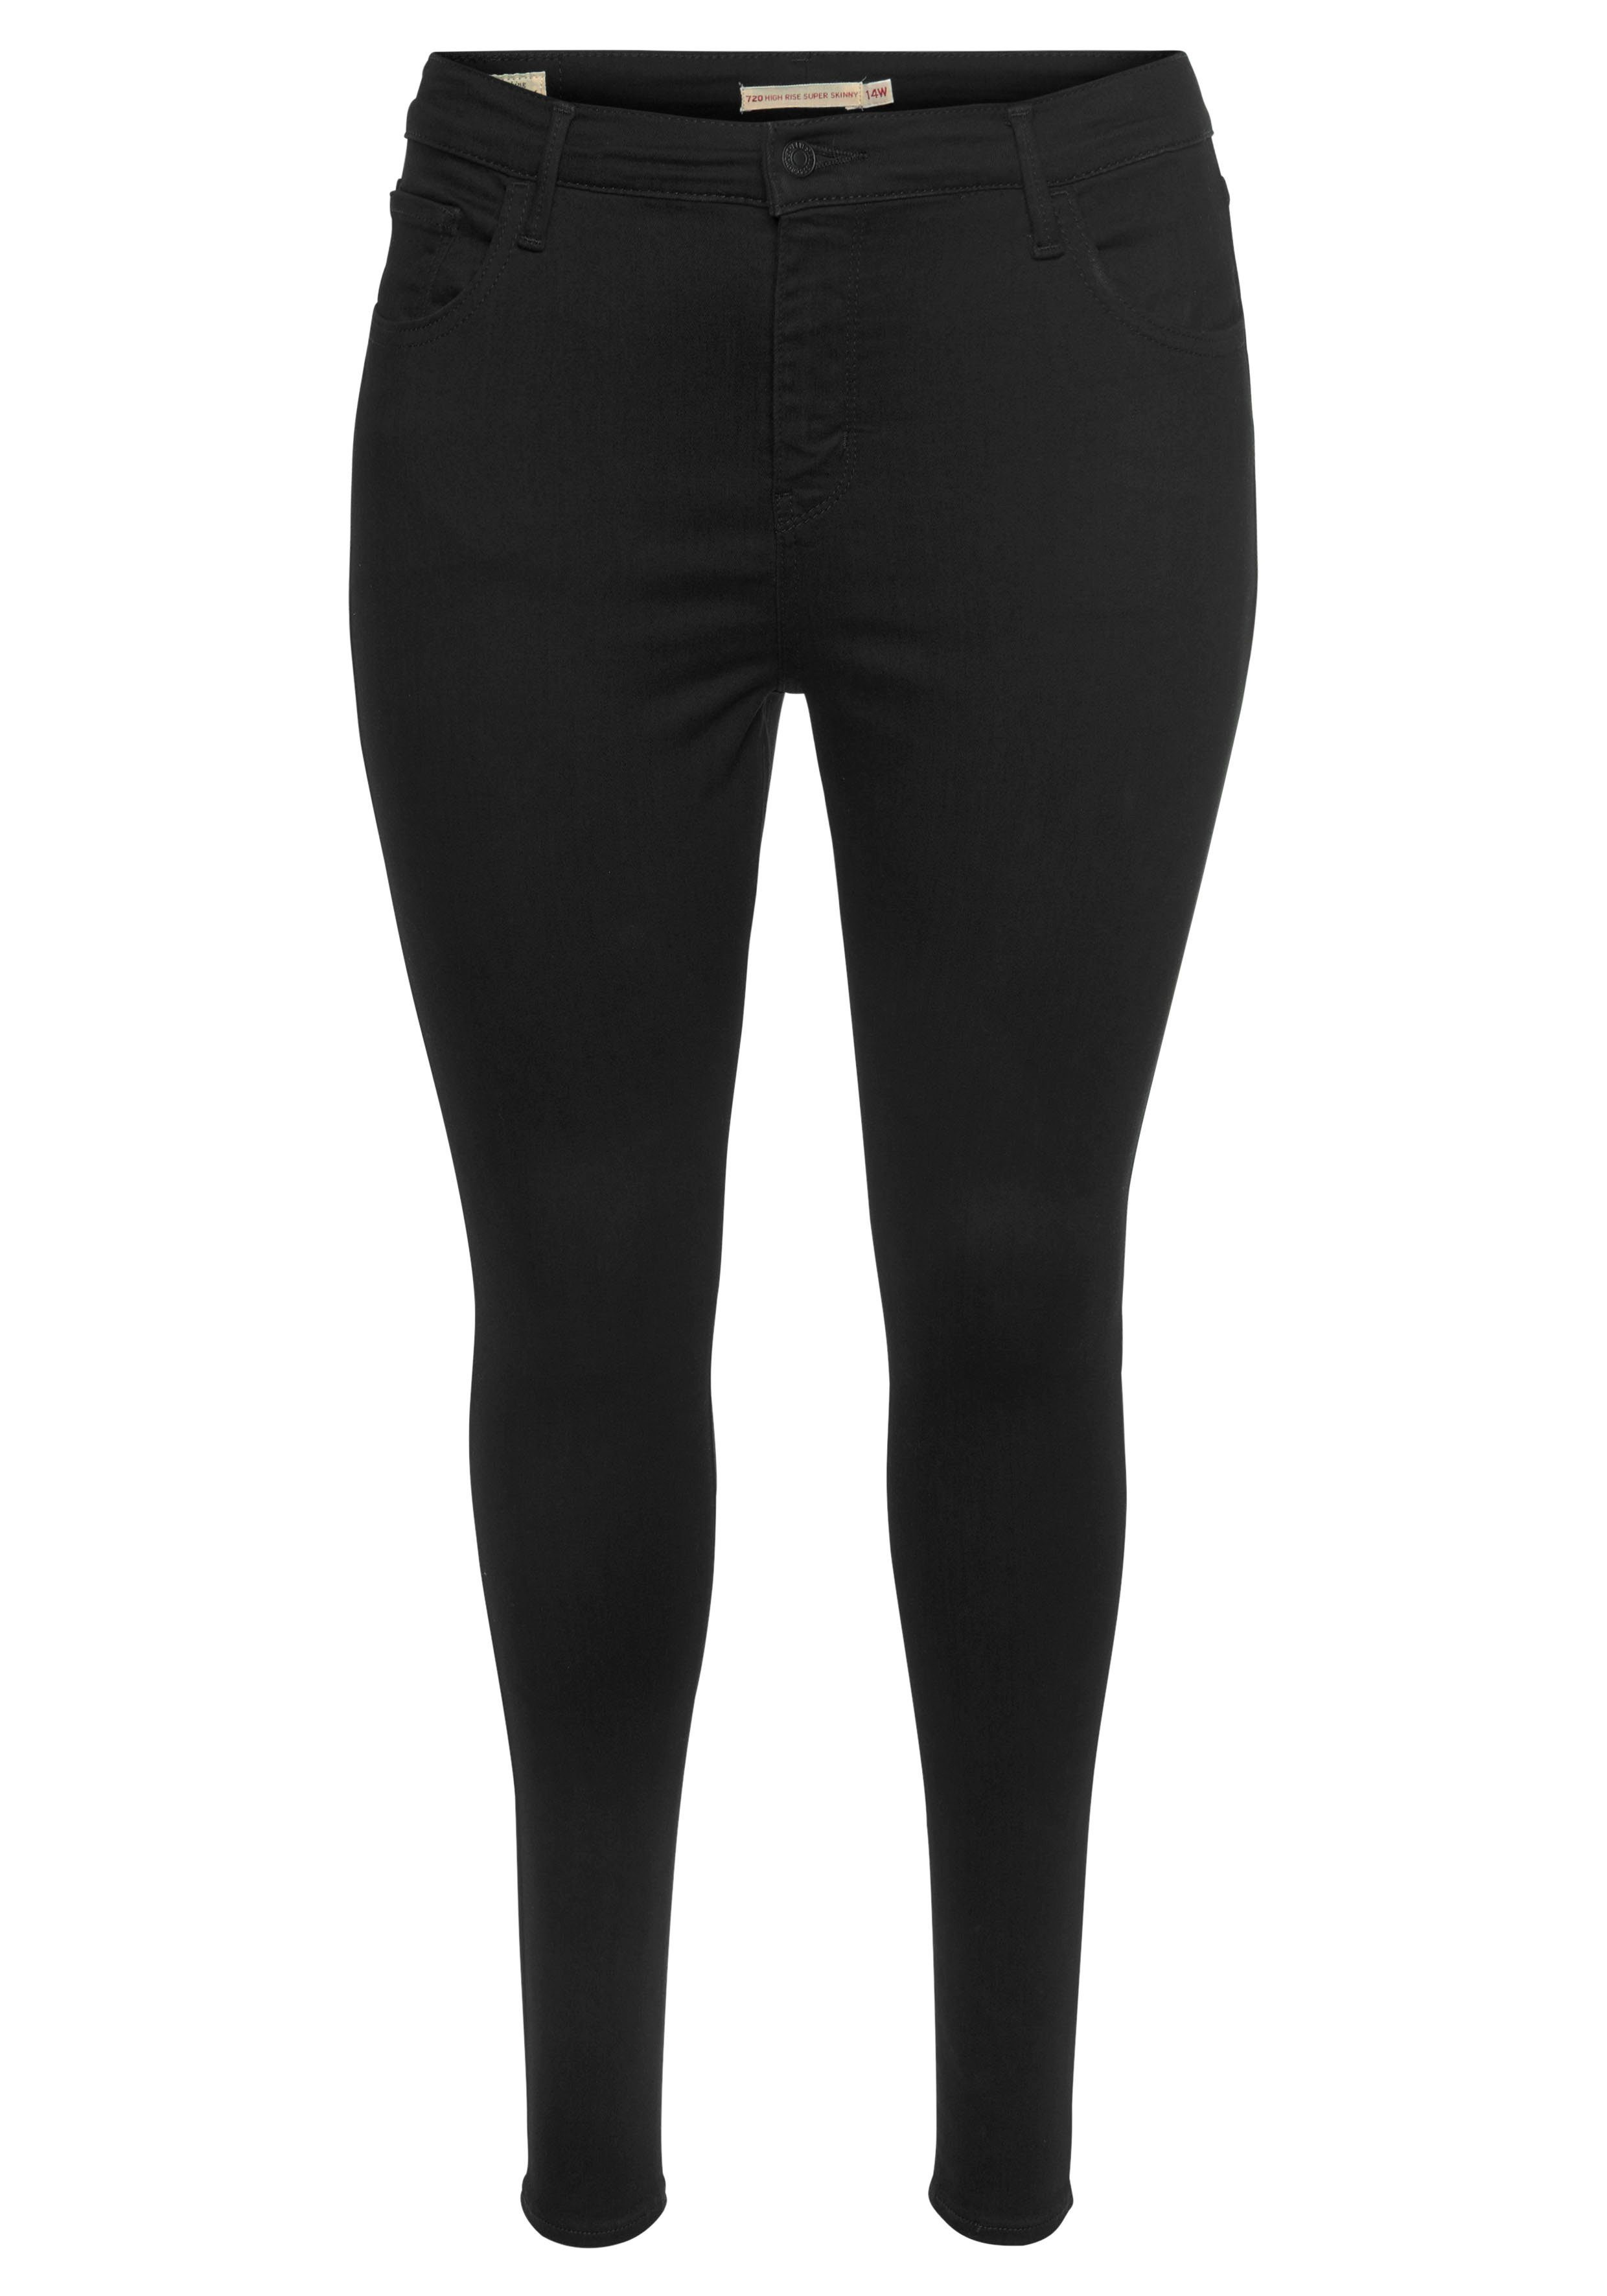 Plus hoher black mit Levi's® Skinny-fit-Jeans 720 Leibhöhe High-Rise